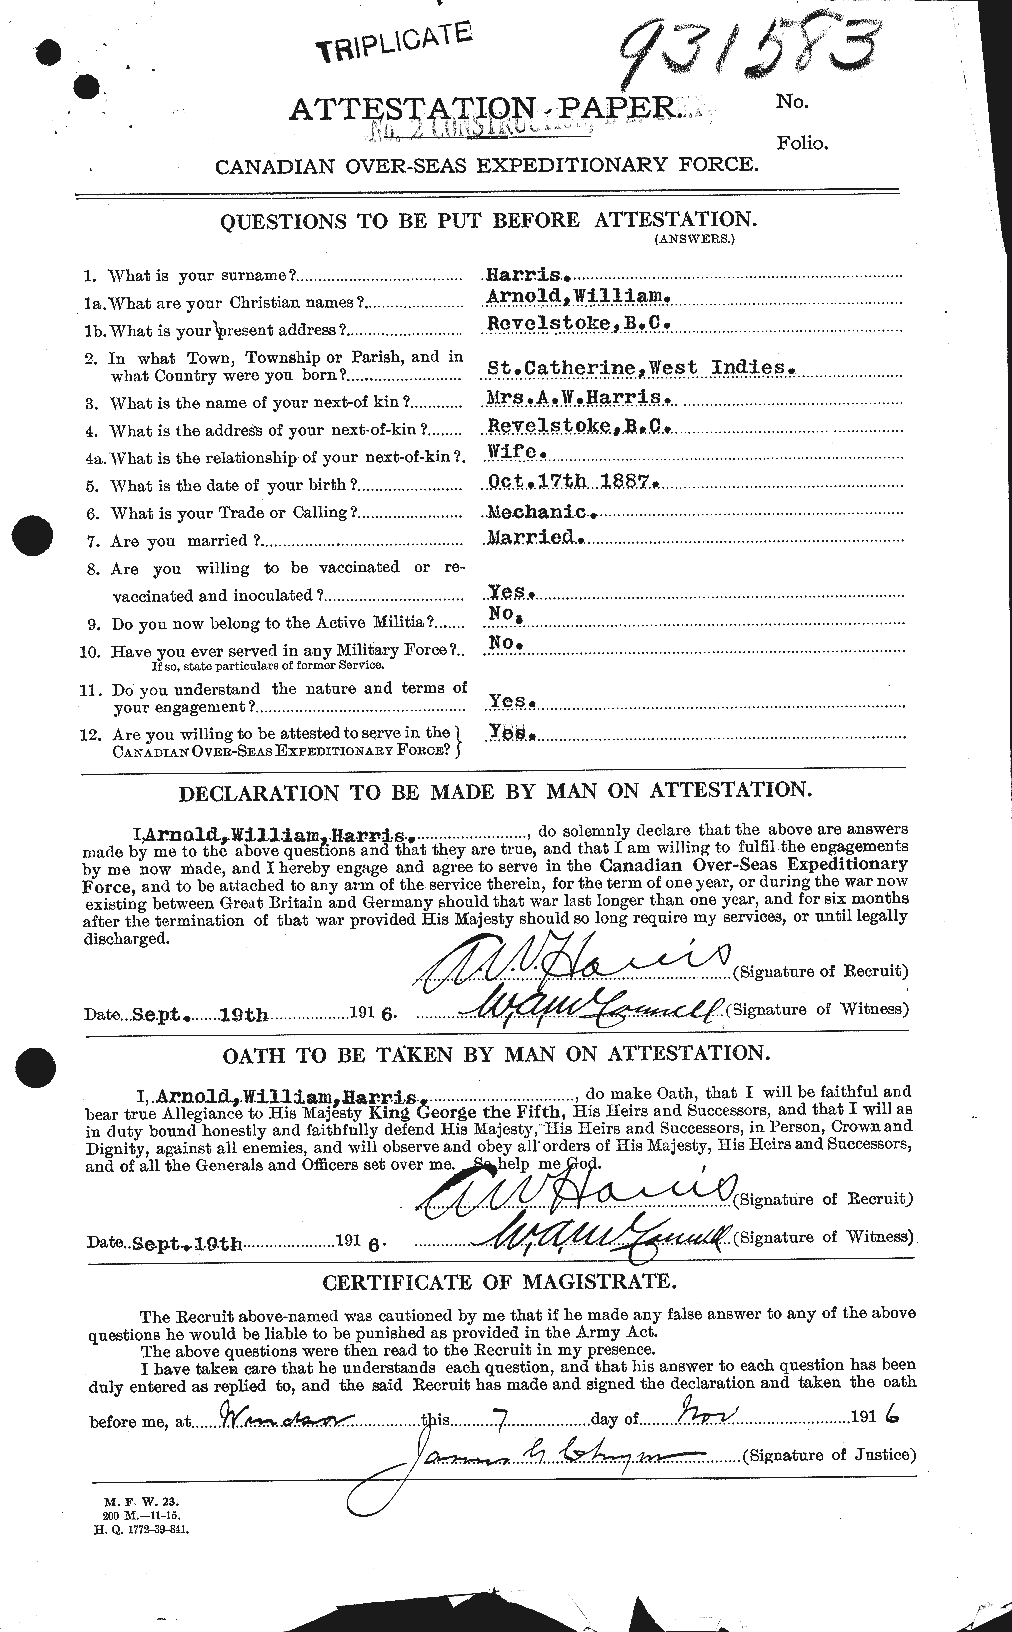 Personnel Records of the First World War - CEF 379113a